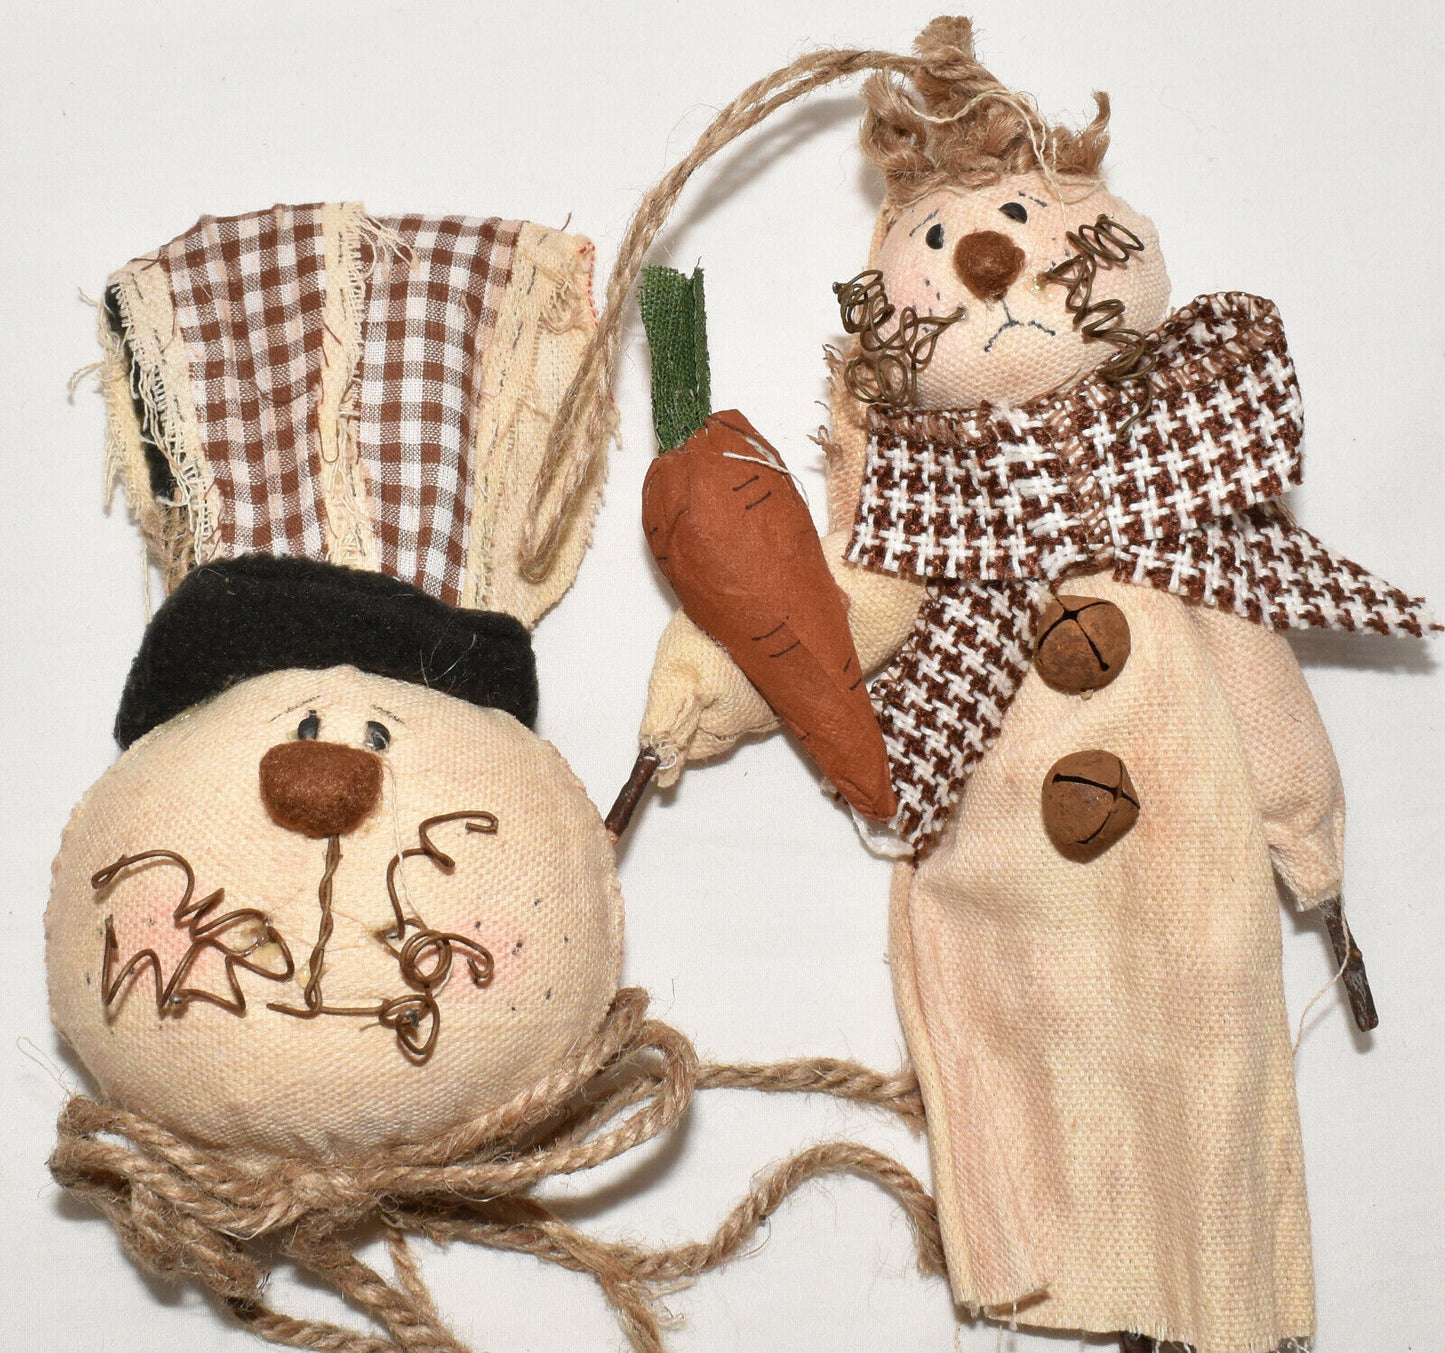 2 Handmade Easter Bunny Dolls Ornaments Easter Decor Cloth Wire Wood Twine New